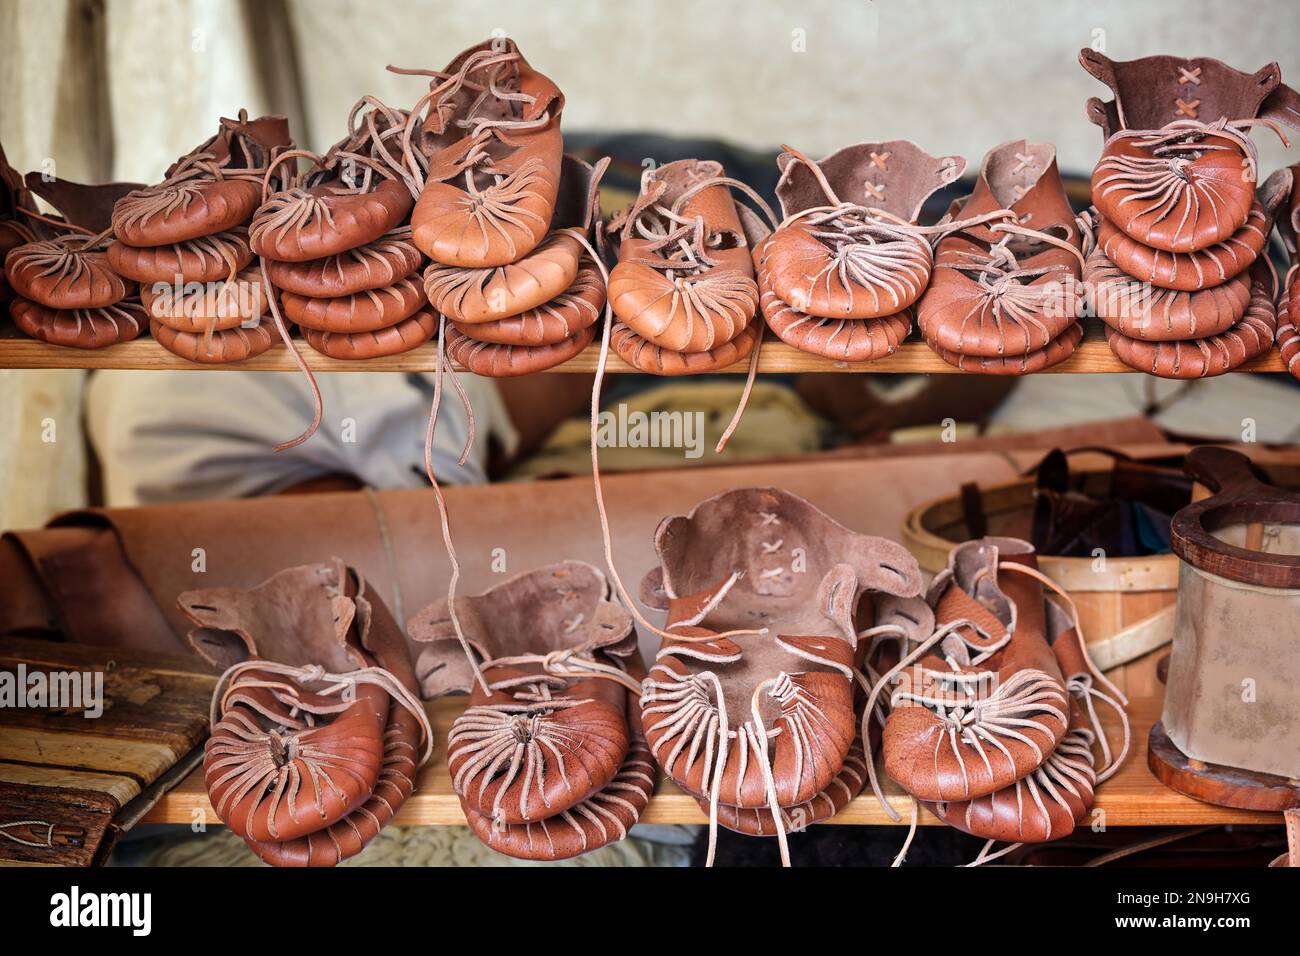 Handmade historical leather shoes for sale stacked on shelves at a medieval market, copy space, selected focus, narrow depth of field Stock Photo